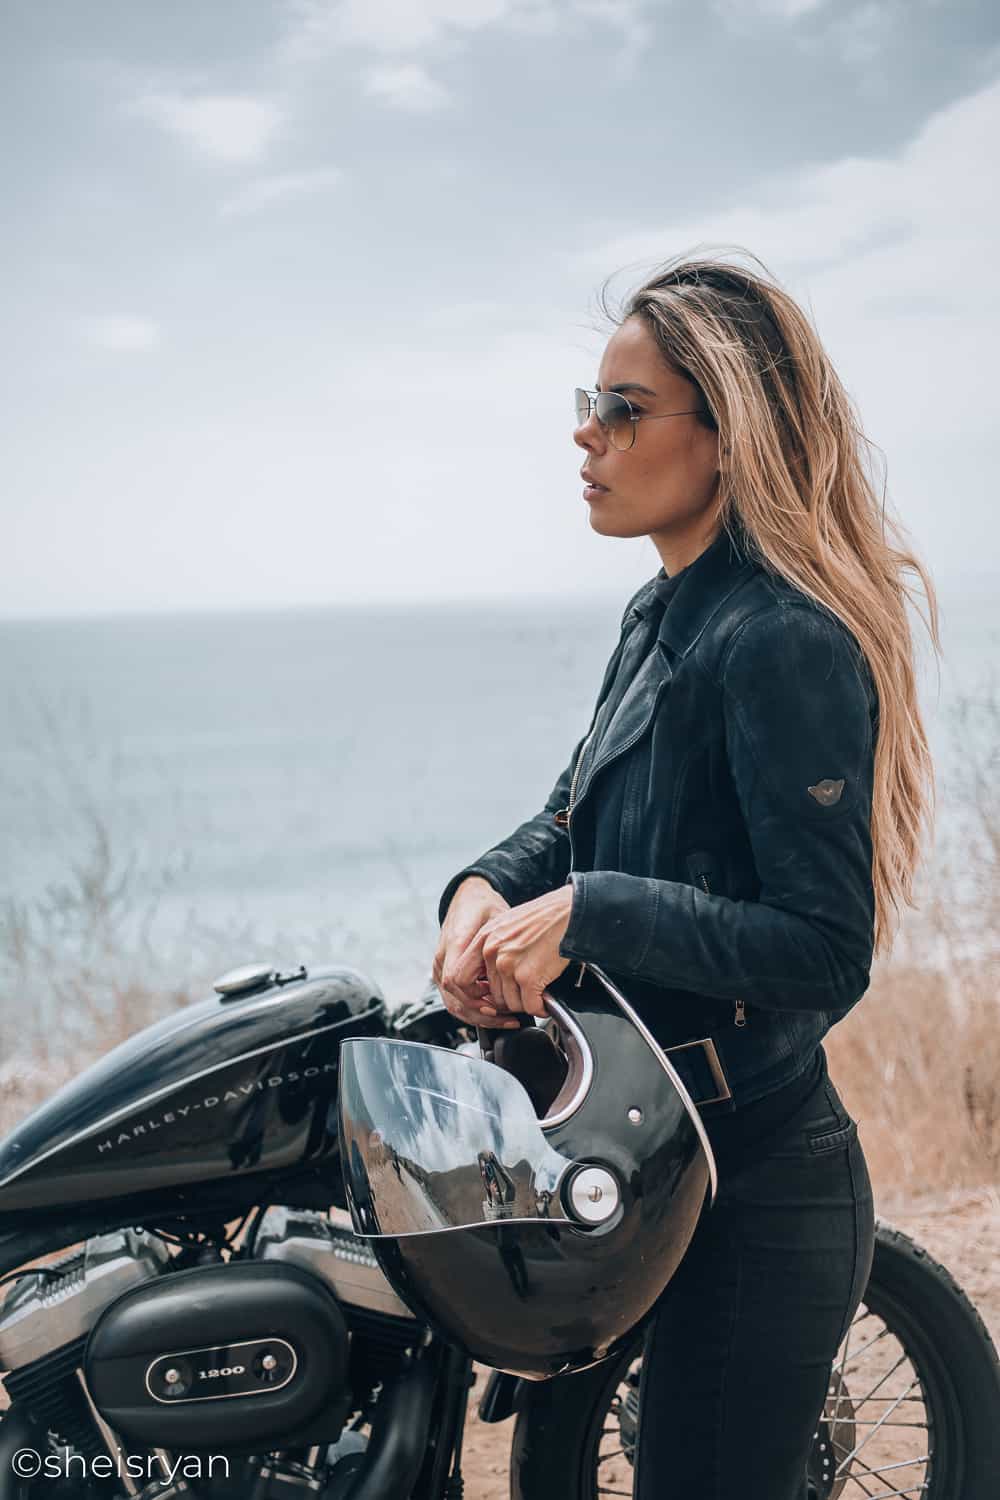 Luxury Leather Jacket Styles That Everyone Will Be Going Crazy For.